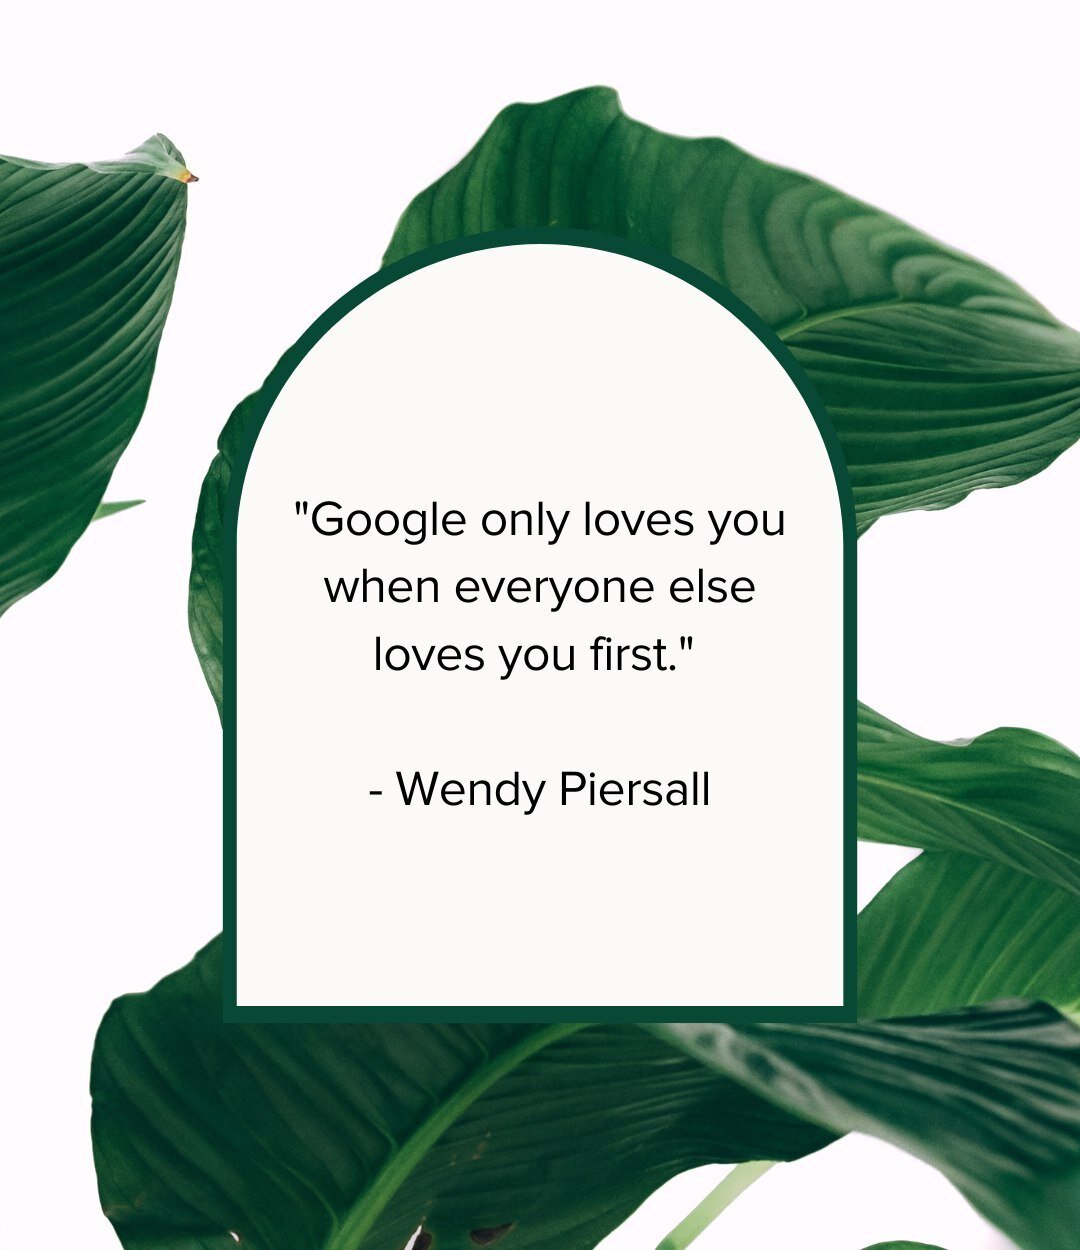 At times it may seem that google is the ultimate judge of your business&rsquo;s online presence, but Wendy Piersall is here to remind us that it&rsquo;s the people that really matter! Focus on creating valuable content and the love from both google a